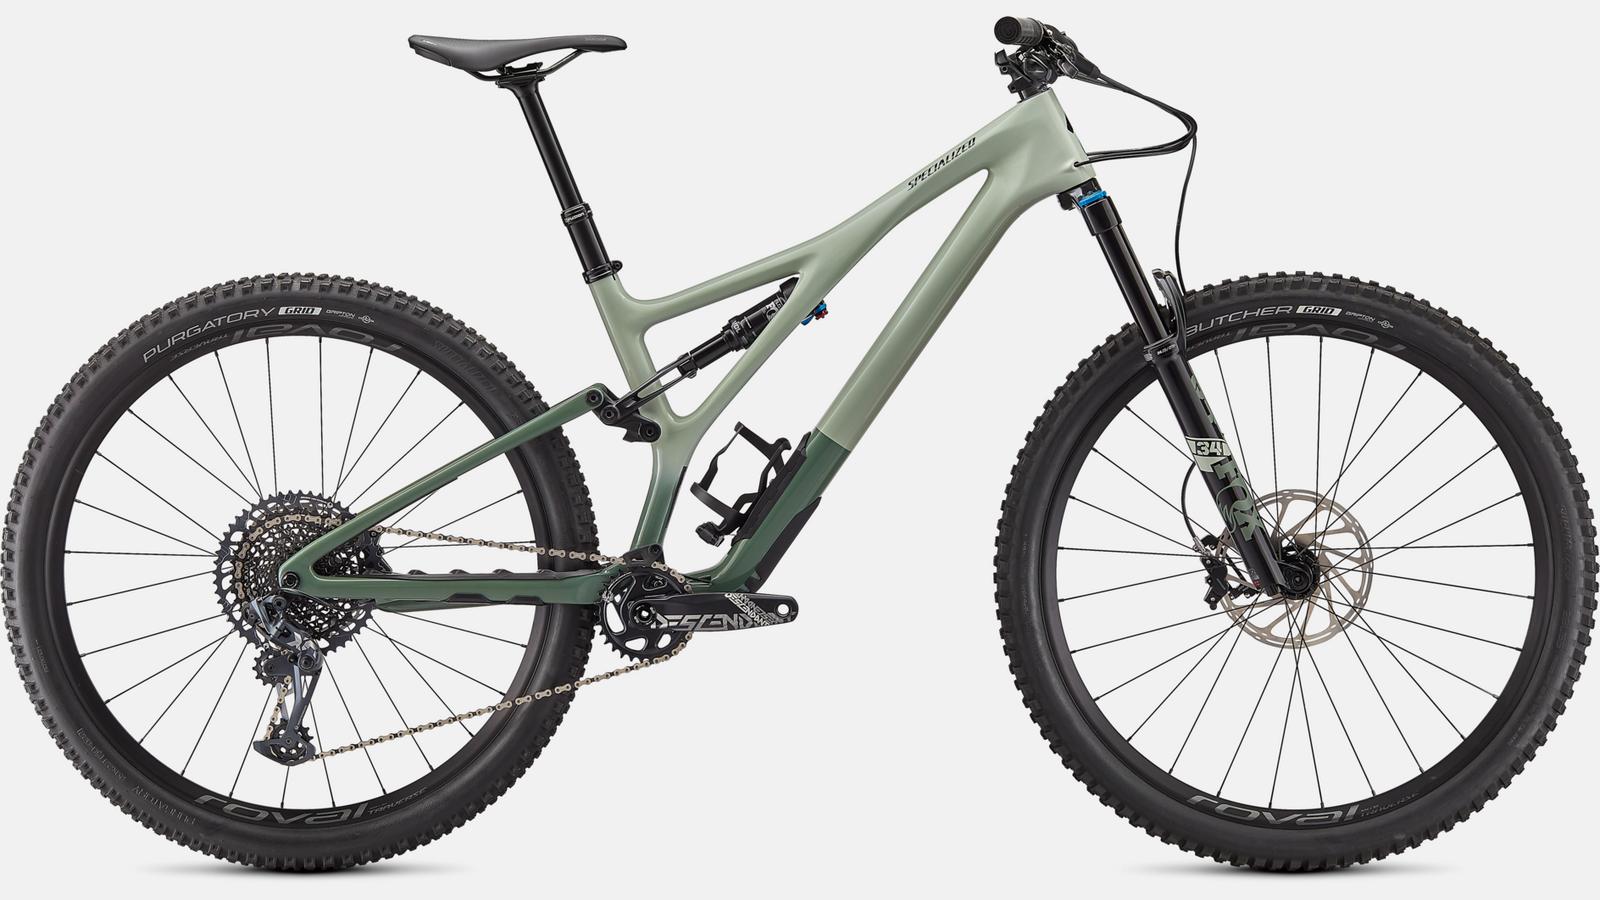 Touch-up paint for 2021 Specialized Stumpjumper Expert - Gloss Spruce